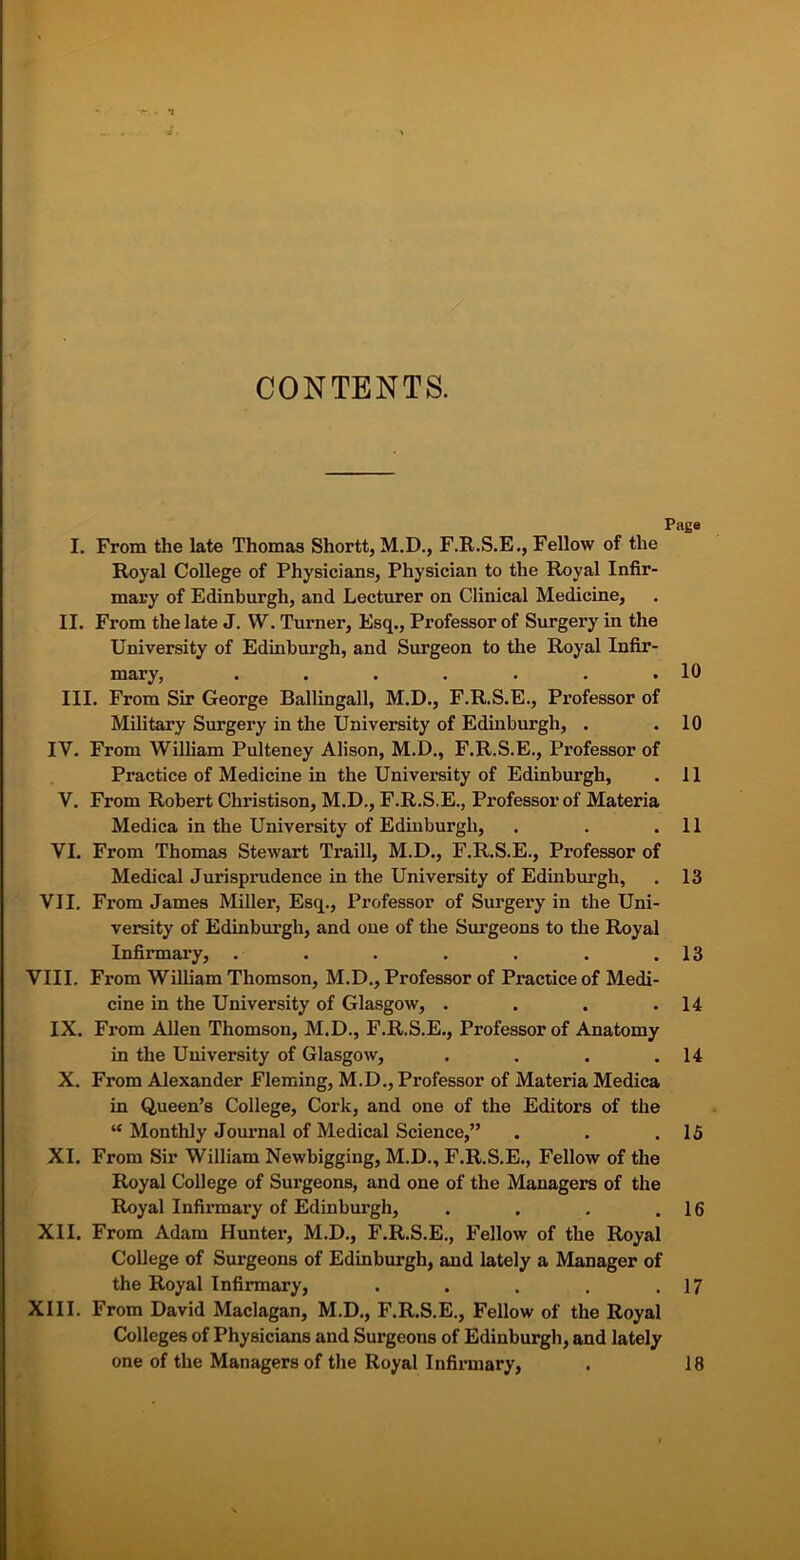 J. CONTENTS. Paga I. From the late Thomas Shortt, M.D., F.R.S.E., Fellow of the Royal College of Physicians, Physician to the Royal Infir- mary of Edinburgh, and Lecturer on Clinical Medicine, II. From the late J. W. Turner, Esq., Professor of Surgery in the University of Edinburgh, and Surgeon to the Royal Infir- mary, . . . . . . .10 III. From Sir George Ballingall, M.D., F.R.S.E., Professor of Military Surgery in the University of Edinburgh, . . 10 IV. From William Pulteney Alison, M.D., F.R.S.E., Professor of Practice of Medicine in the University of Edinburgh, . 11 V. From Robert Christison, M.D., F.R.S.E., Professor of Materia Medica in the University of Edinburgh, . . .11 VI. From Thomas Stewart Traill, M.D., F.R.S.E., Professor of Medical Jurisprudence in the University of Edinburgh, . 13 VII. From James Miller, Esq., Professor of Surgery in the Uni- versity of Edinburgh, and one of the Surgeons to the Royal Infirmary, . . . . . . .13 VIII. From William Thomson, M.D., Professor of Practice of Medi- cine in the University of Glasgow, . . . .14 IX. From Allen Thomson, M.D., F.R.S.E., Professor of Anatomy in the University of Glasgow, . . . .14 X. From Alexander Fleming, M.D., Professor of Materia Medica in Queen’s College, Cork, and one of the Editors of the “ Monthly Journal of Medical Science,” . . .15 XI. From Sir William Newbigging, M.D., F.R.S.E., Fellow of the Royal College of Surgeons, and one of the Managers of the Royal Infirmary of Edinburgh, . . . .16 XII. From Adam Hunter, M.D., F.R.S.E., Fellow of the Royal College of Surgeons of Edinburgh, and lately a Manager of the Royal Infirmary, . . . . .17 XIII. From David Maclagan, M.D., F.R.S.E., Fellow of the Royal Colleges of Physicians and Surgeons of Edinburgh, and lately one of the Managers of the Royal Infirmary, 18